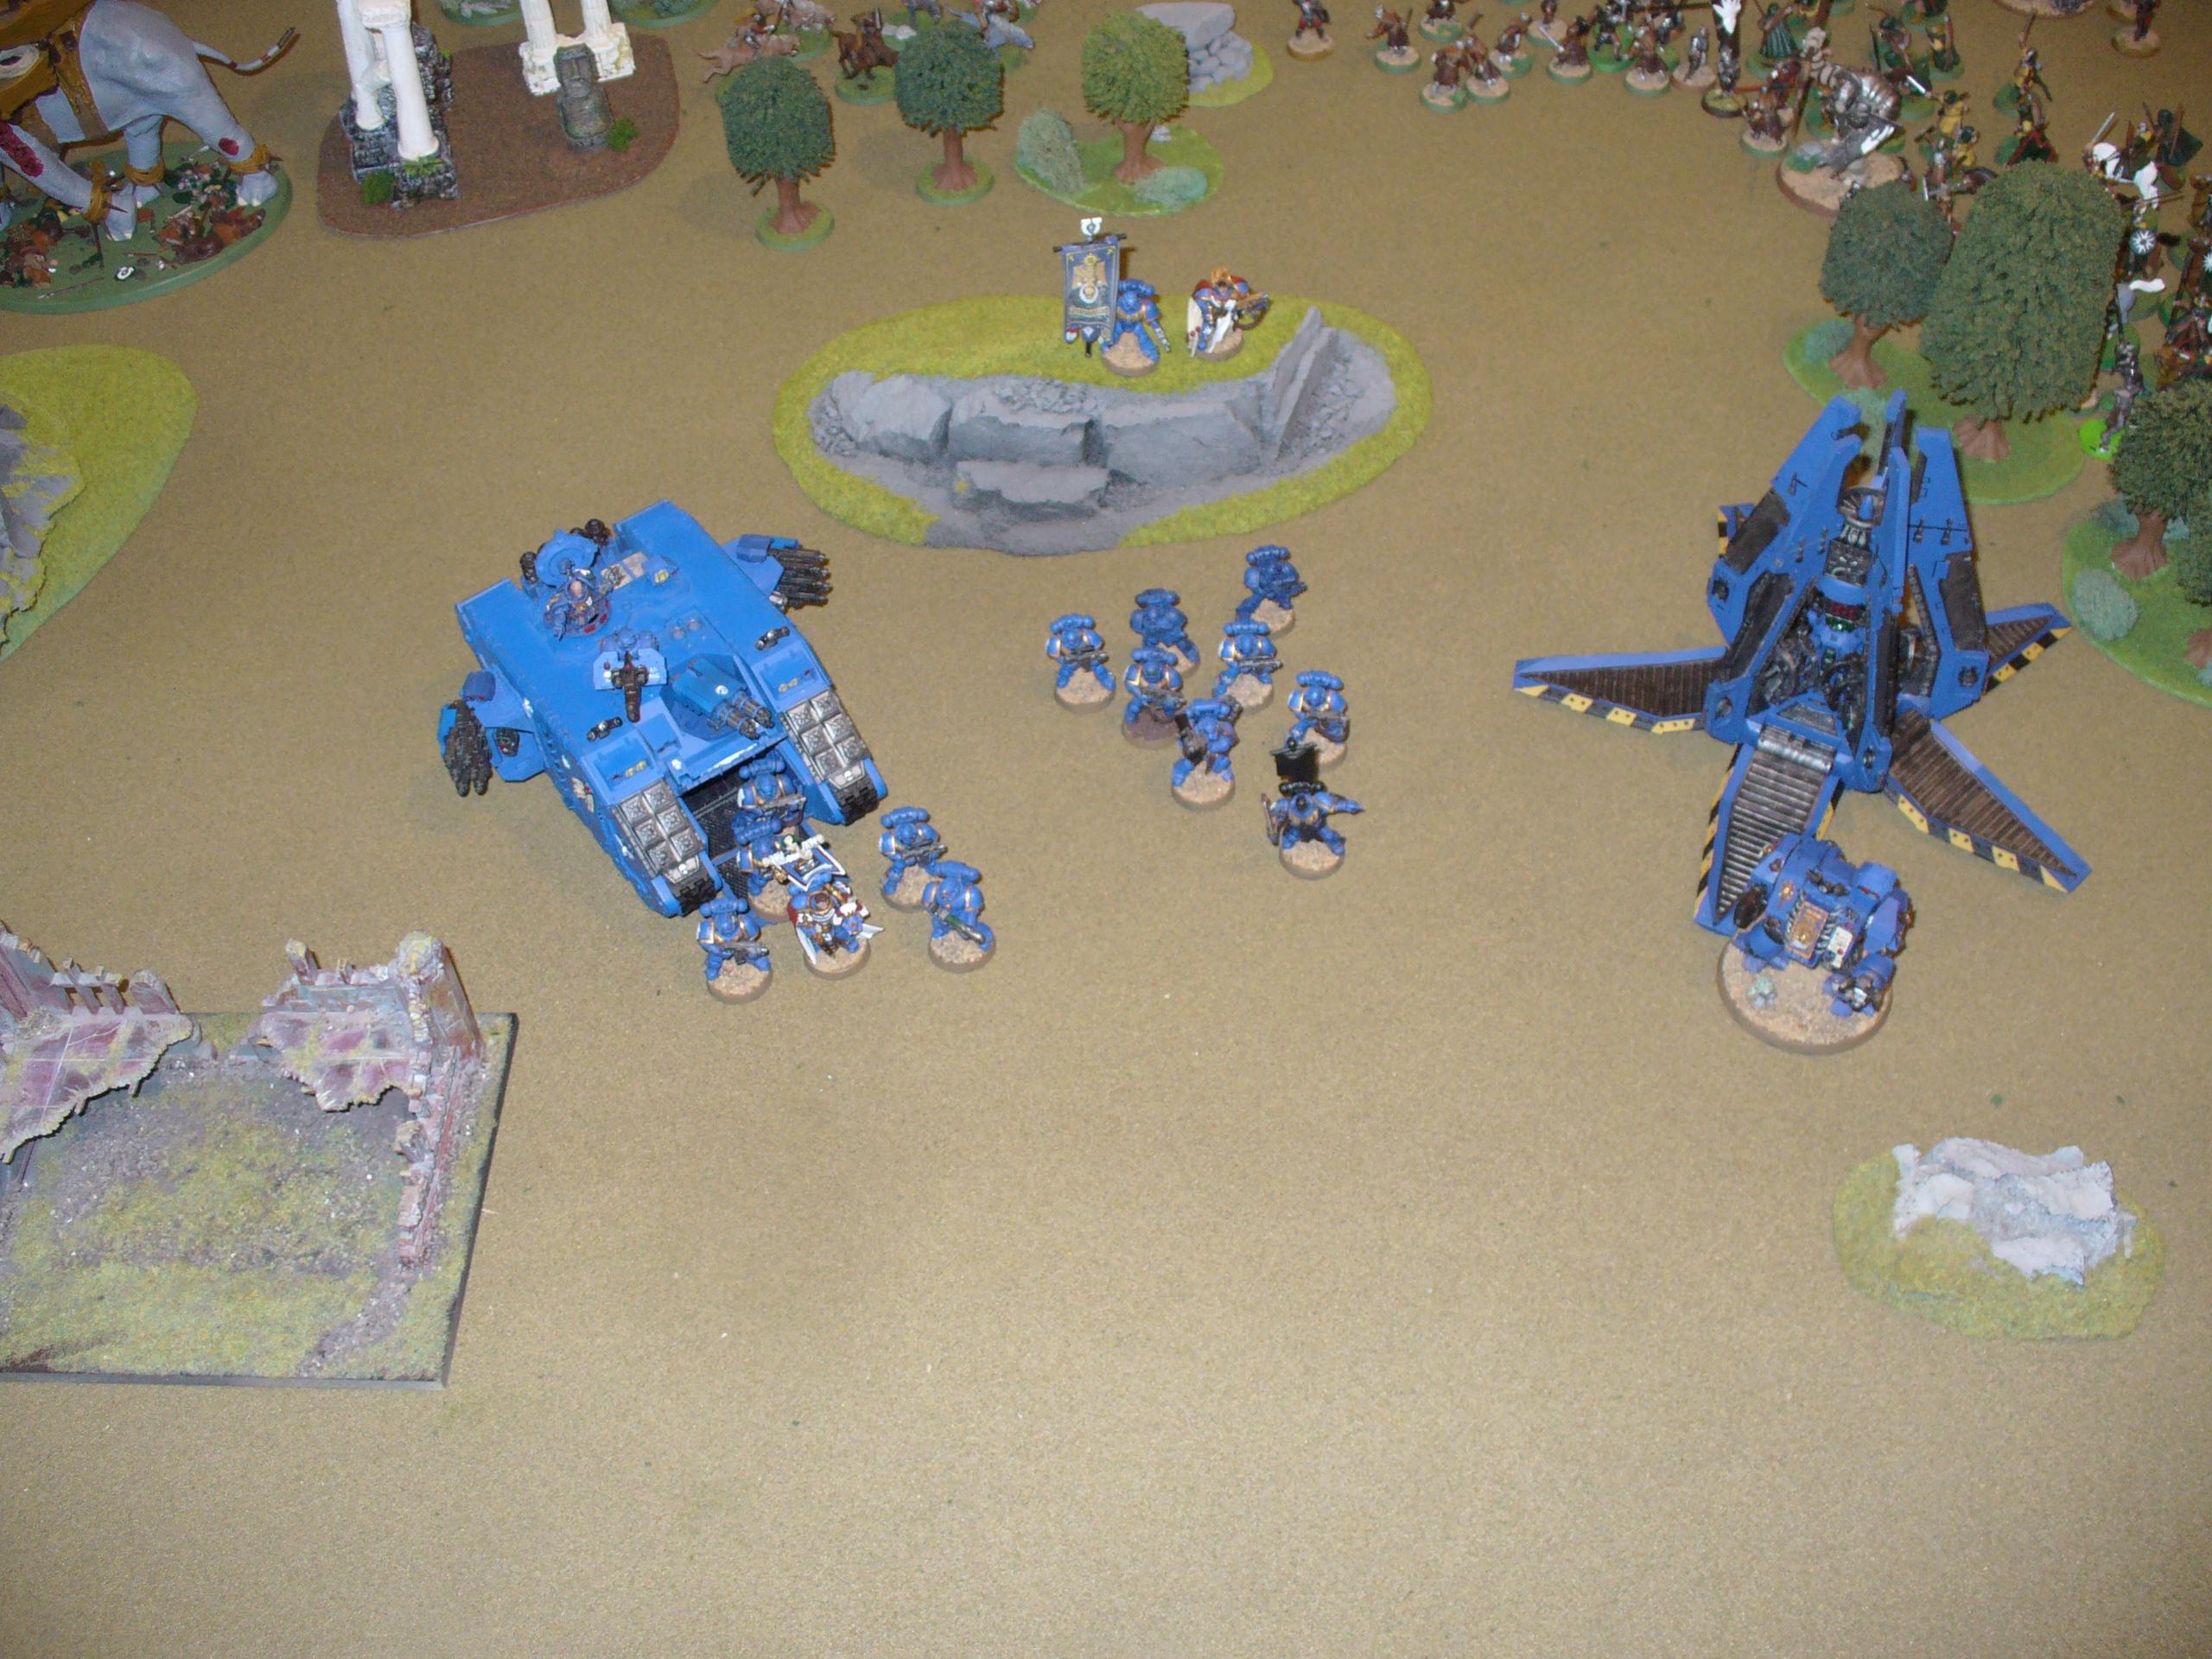 A shot on the table with the Land Raider, magnetized to swap between Crusader and Redeemer